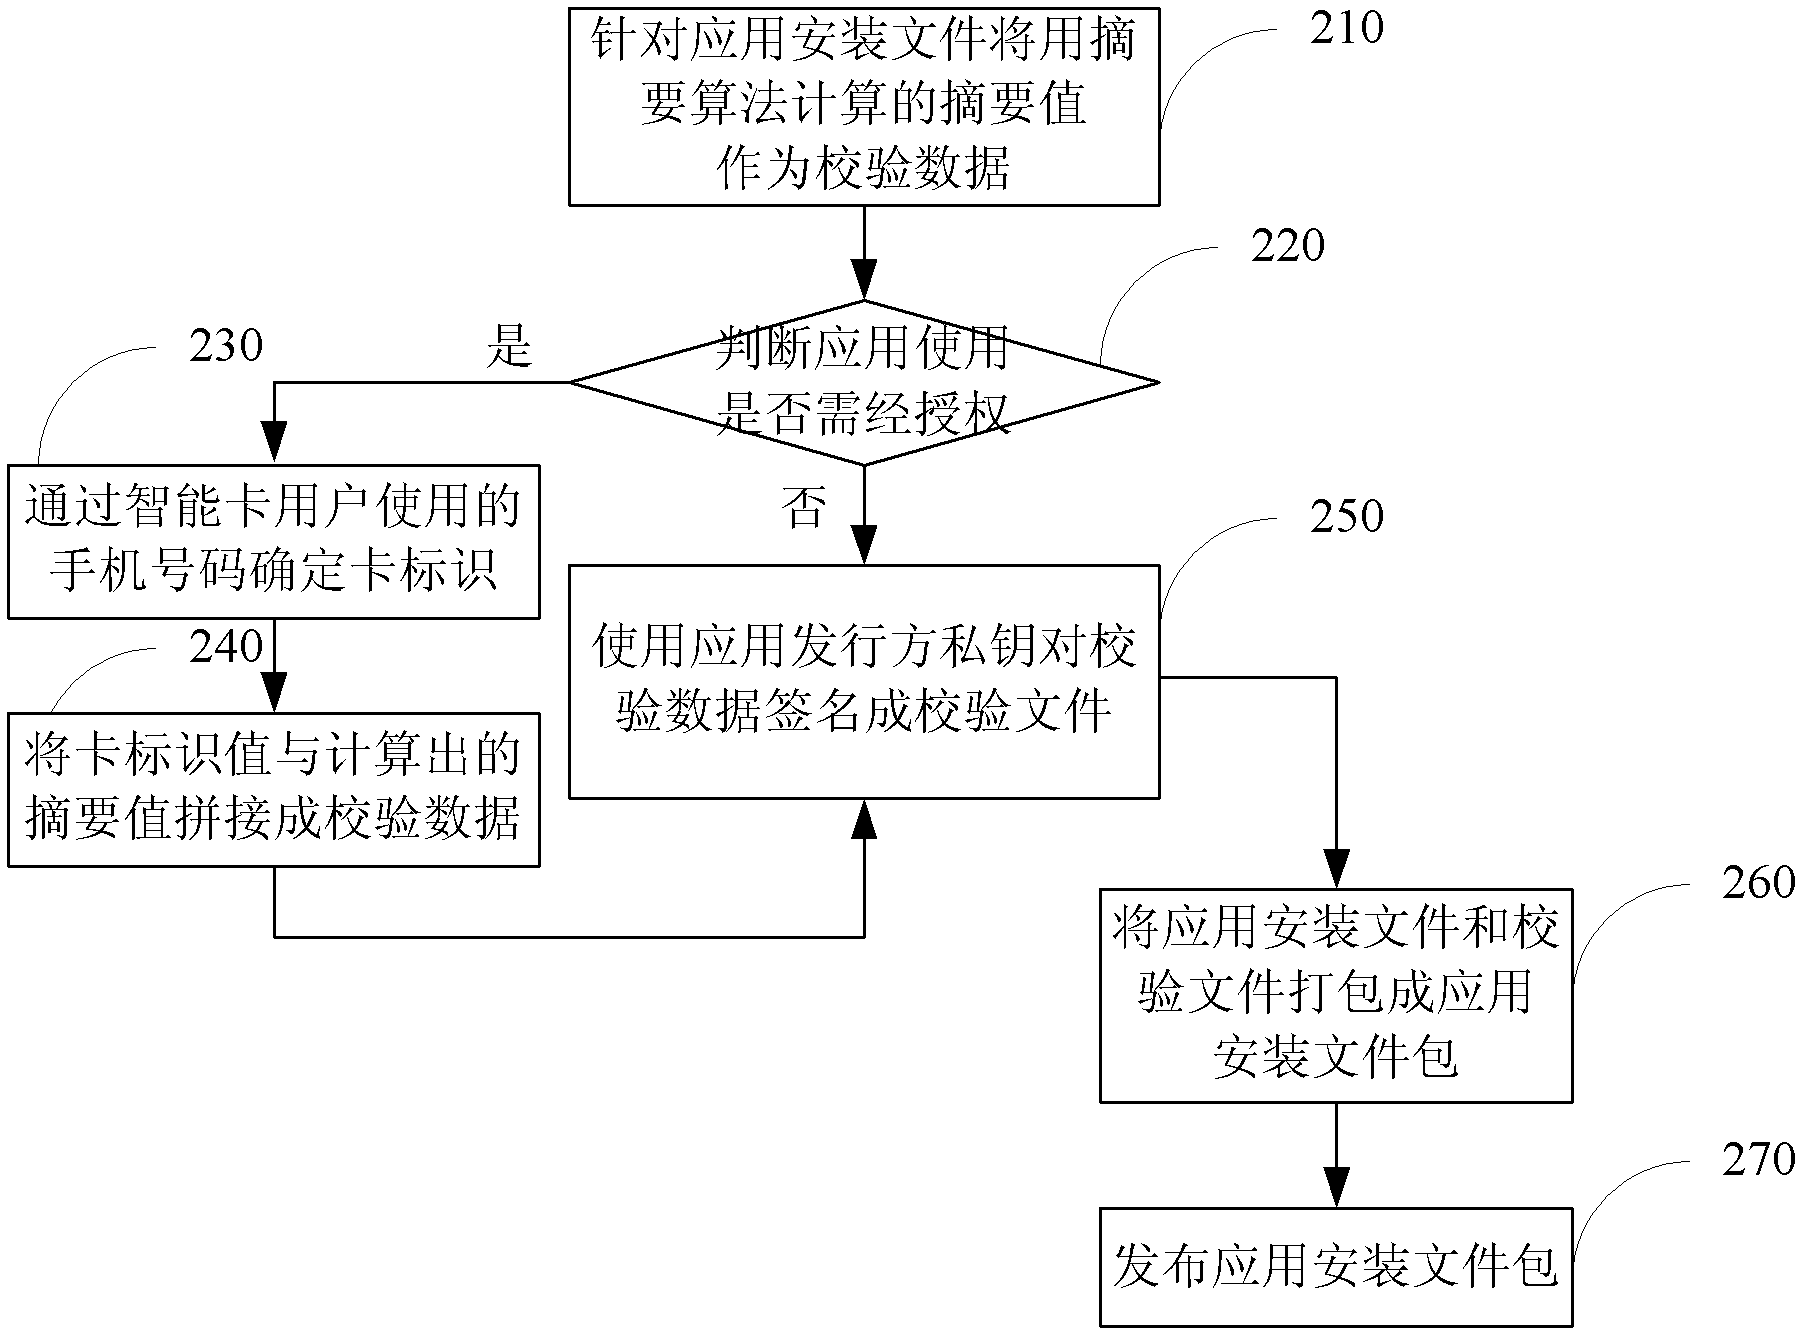 Method and system for realizing smart card application and deployment